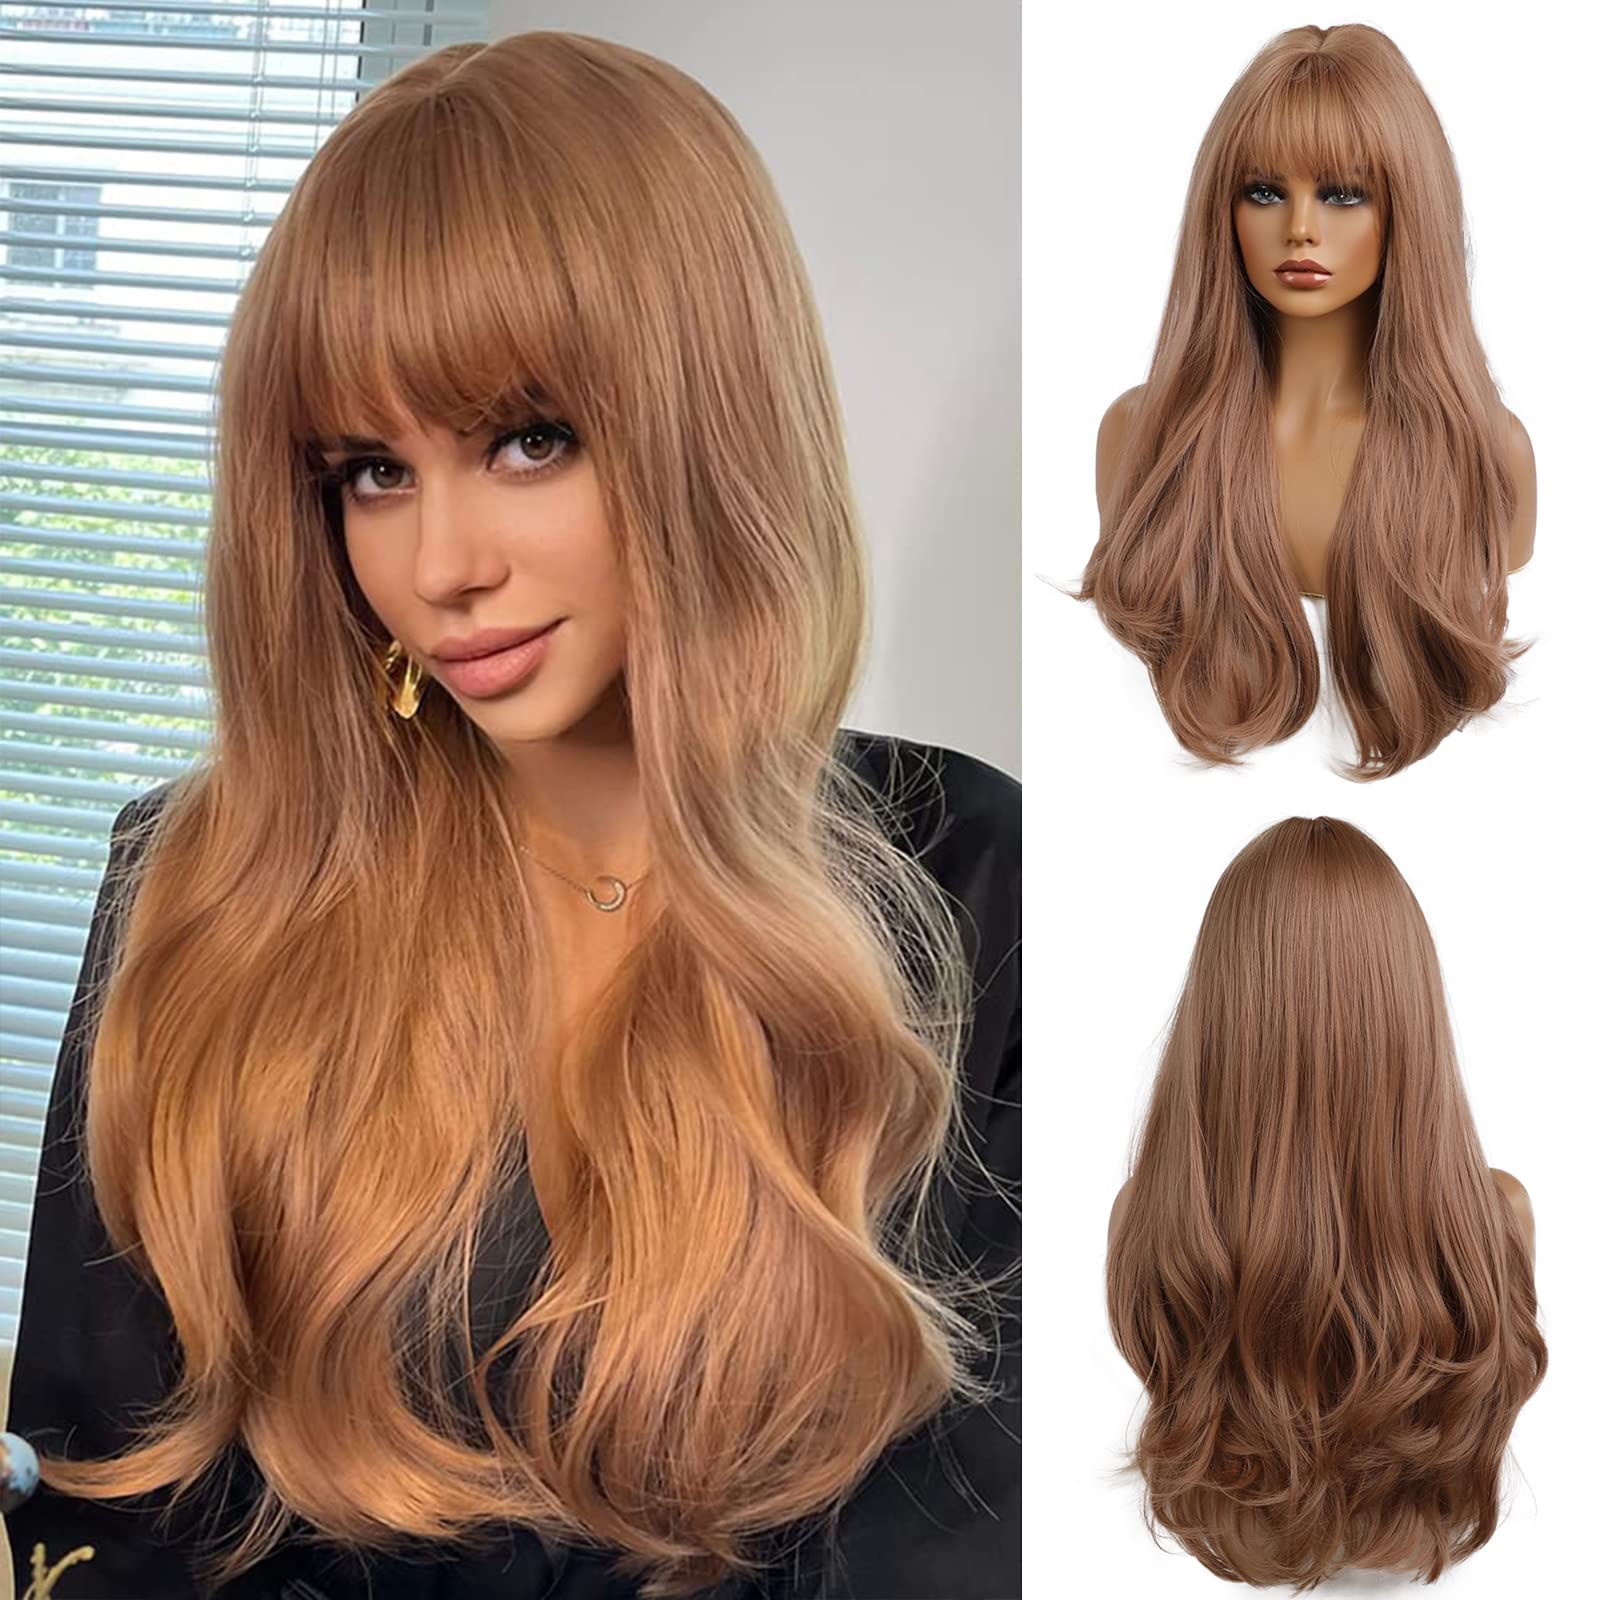 Esmee 24 Inches Strawberry Blonde Long Wavy Wig with Bangs for Women  Natural Synthetic Hair Heat